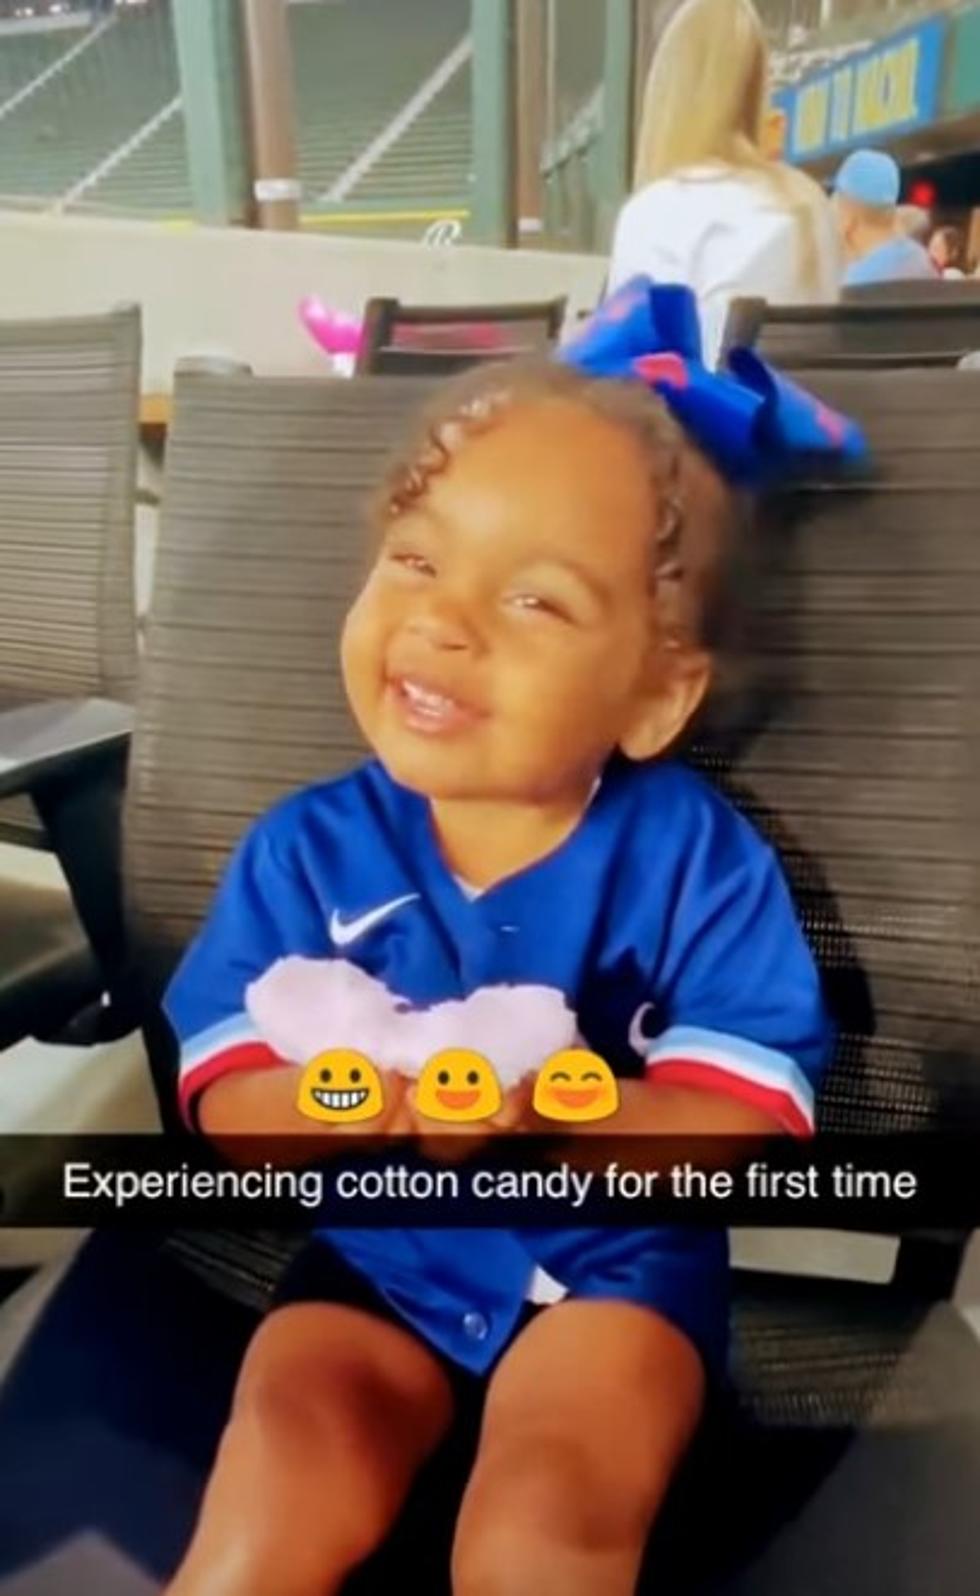 Adorable Texas Rangers Fan Tries Cotton Candy for the First Time [VIDEO]